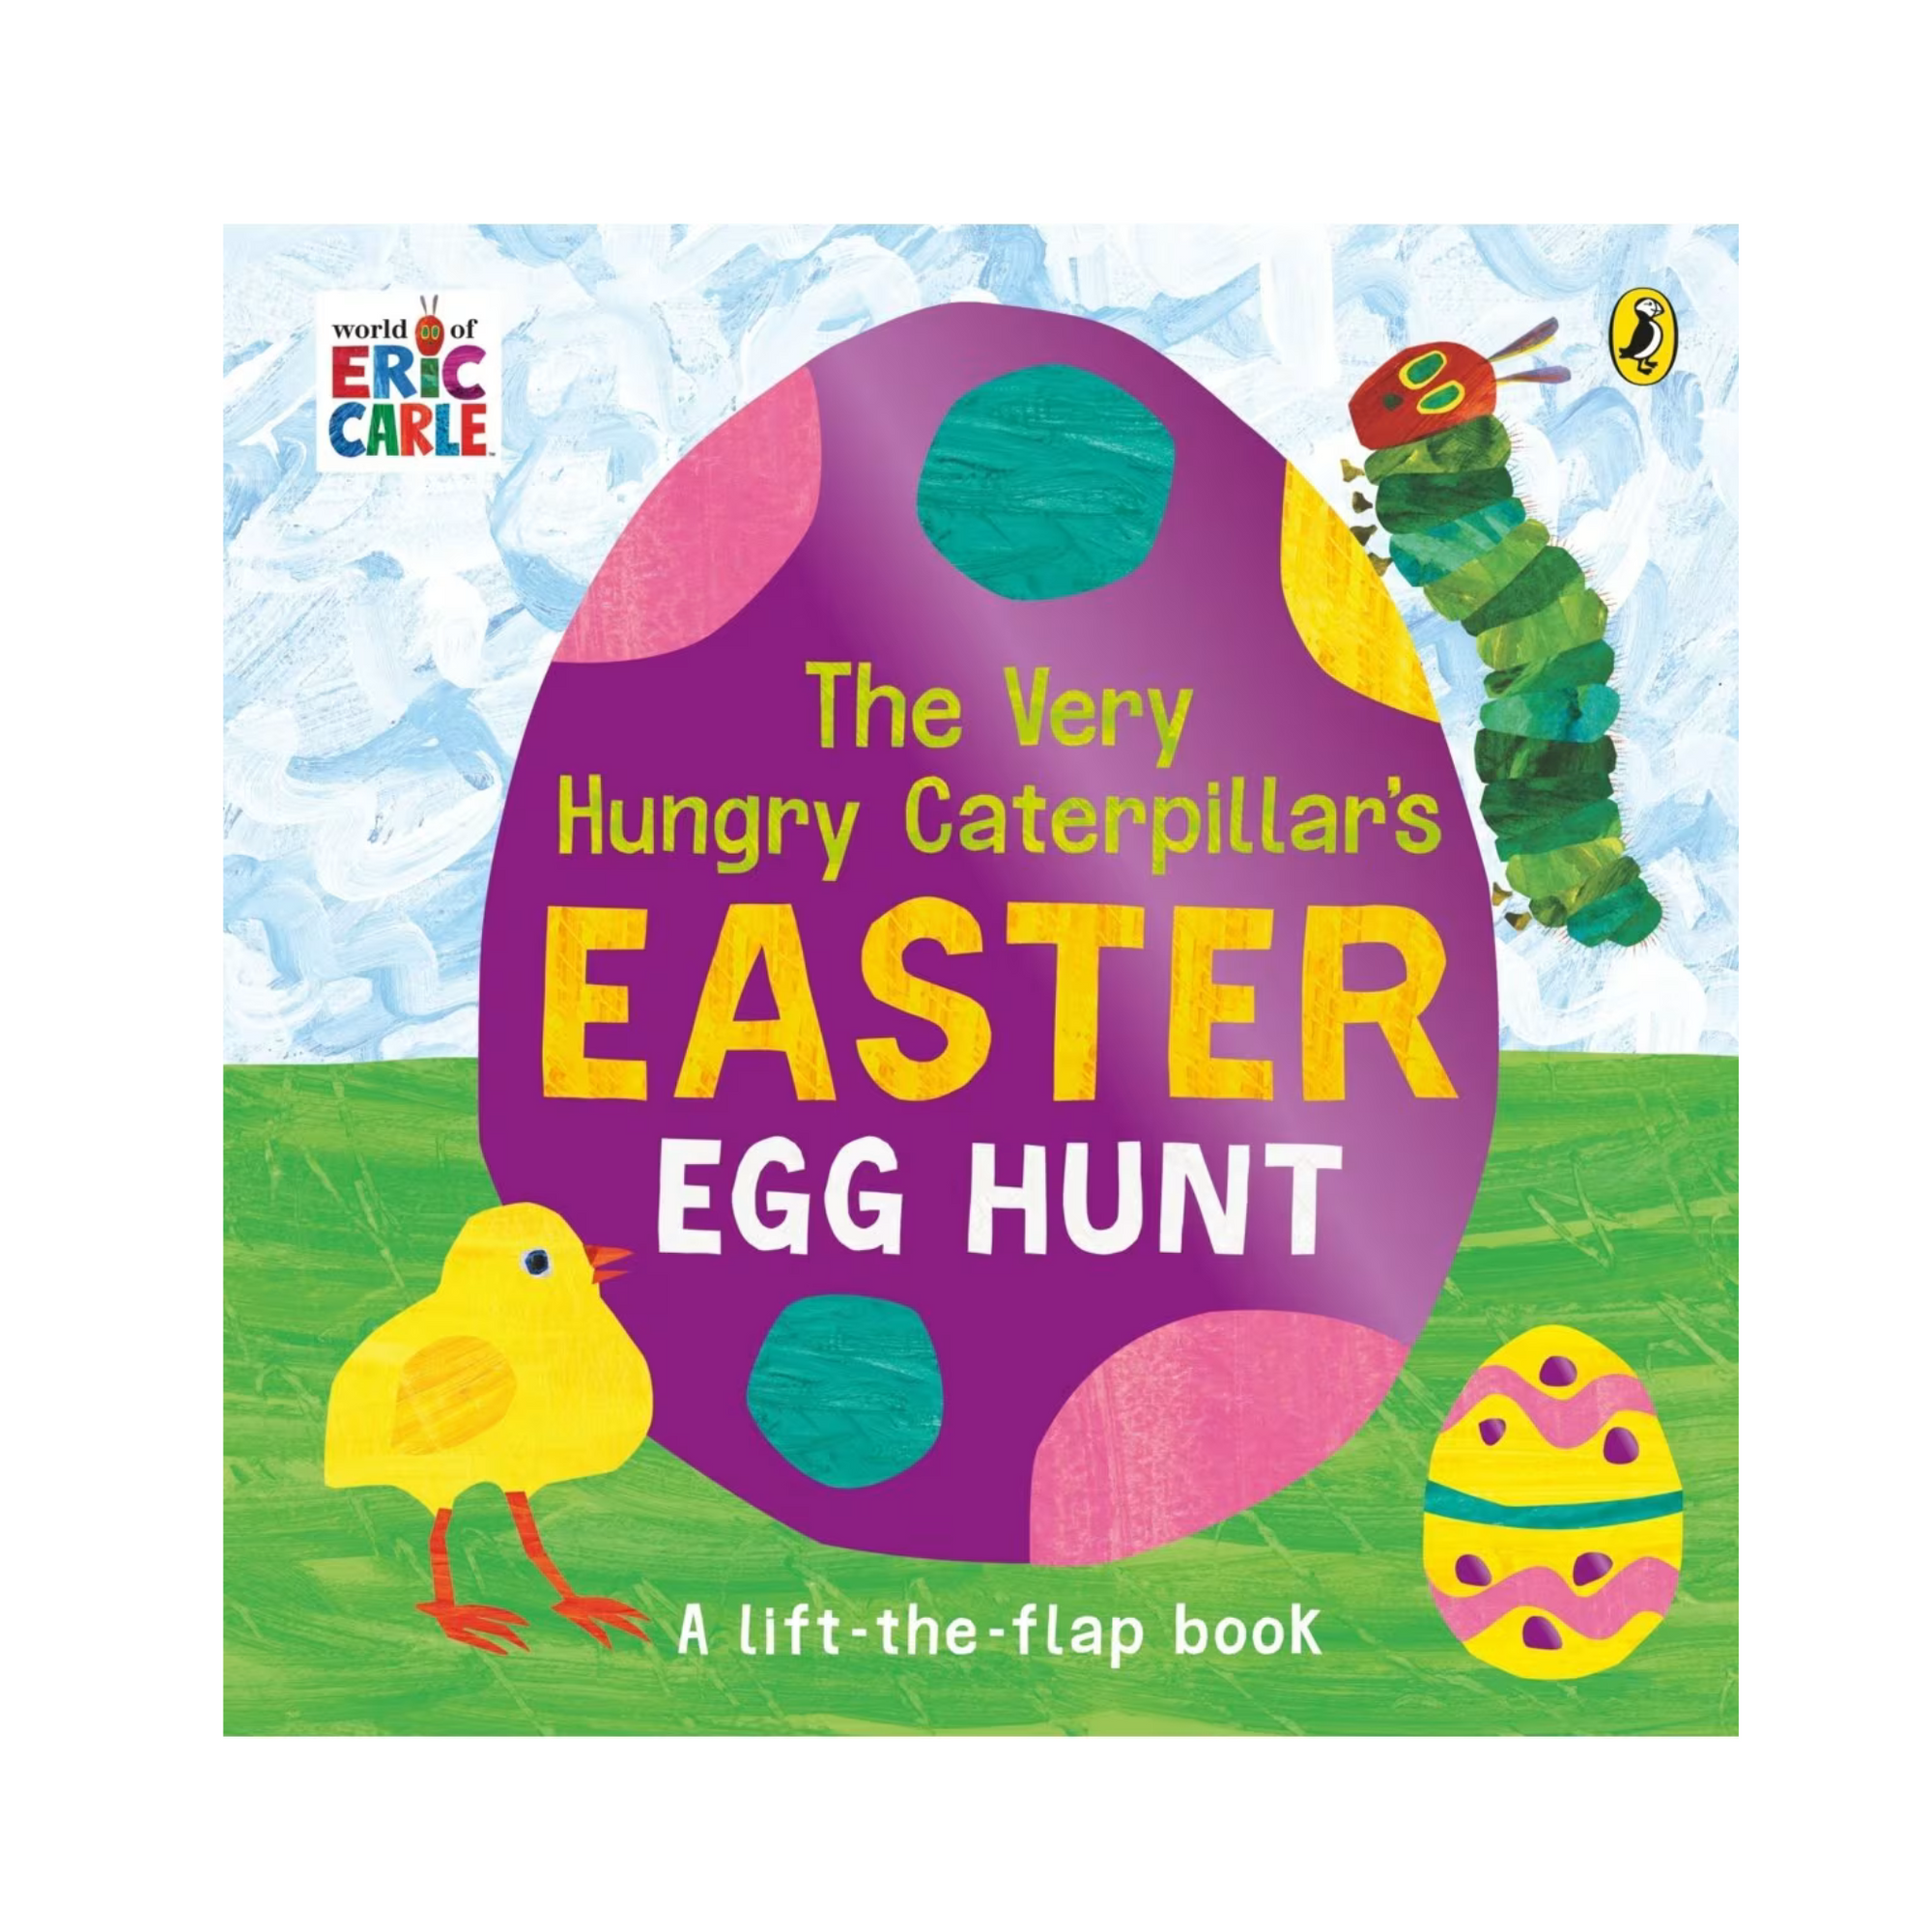 The Very Hungry Caterpillar's Easter Egg Hunt by Eric Carle - Book